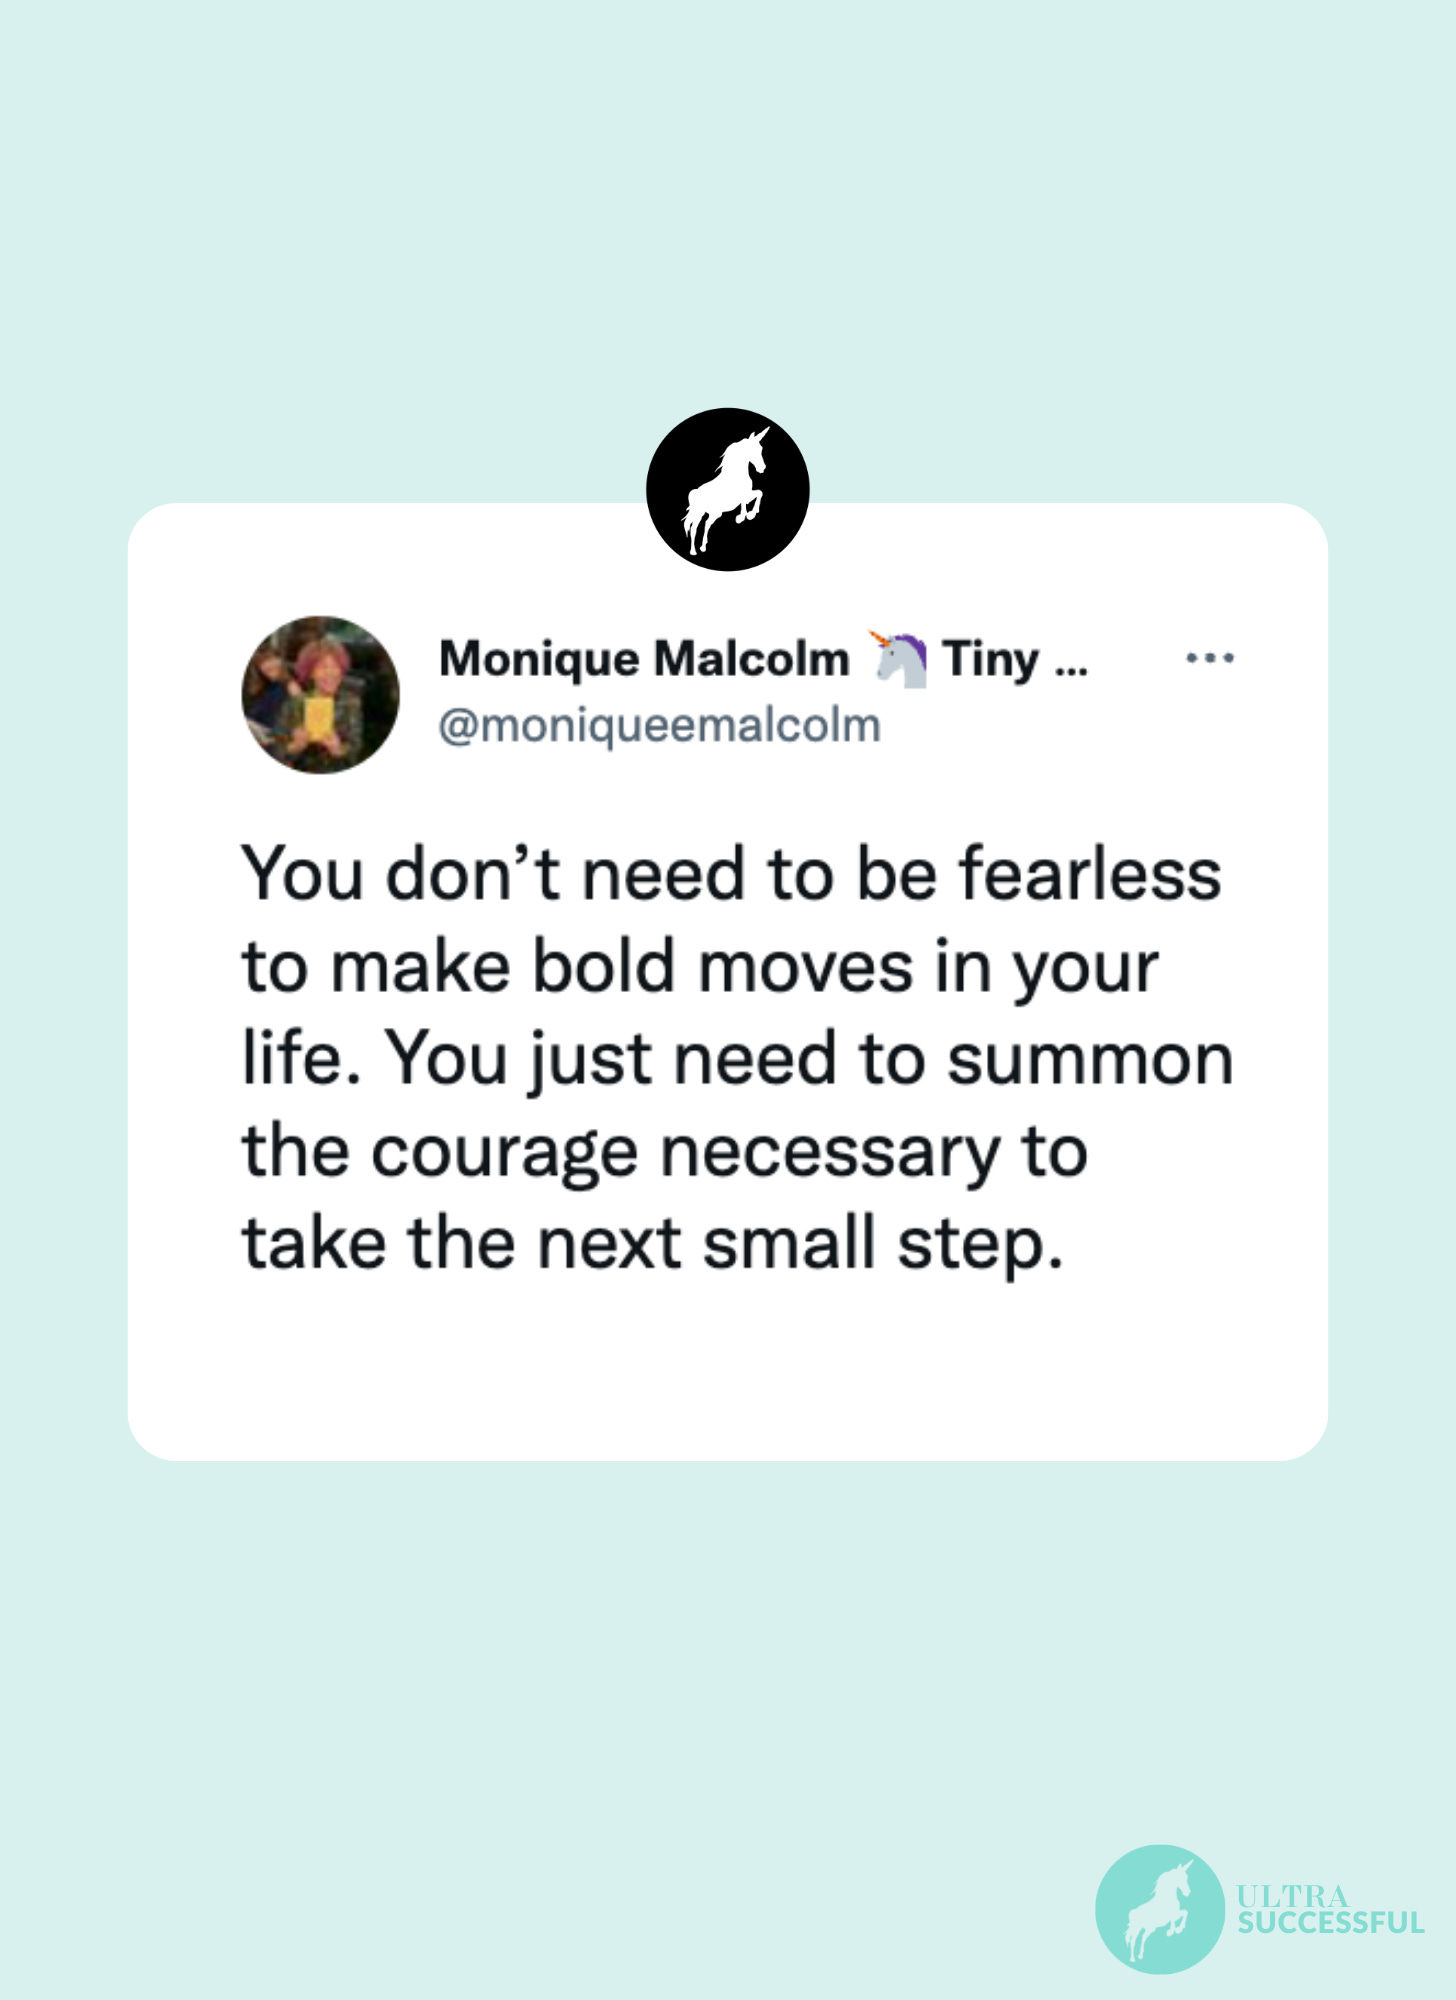 @moniqueemalcolm: You don’t need to be fearless to make bold moves in your life. You just need to summon the courage necessary to take the next small step.